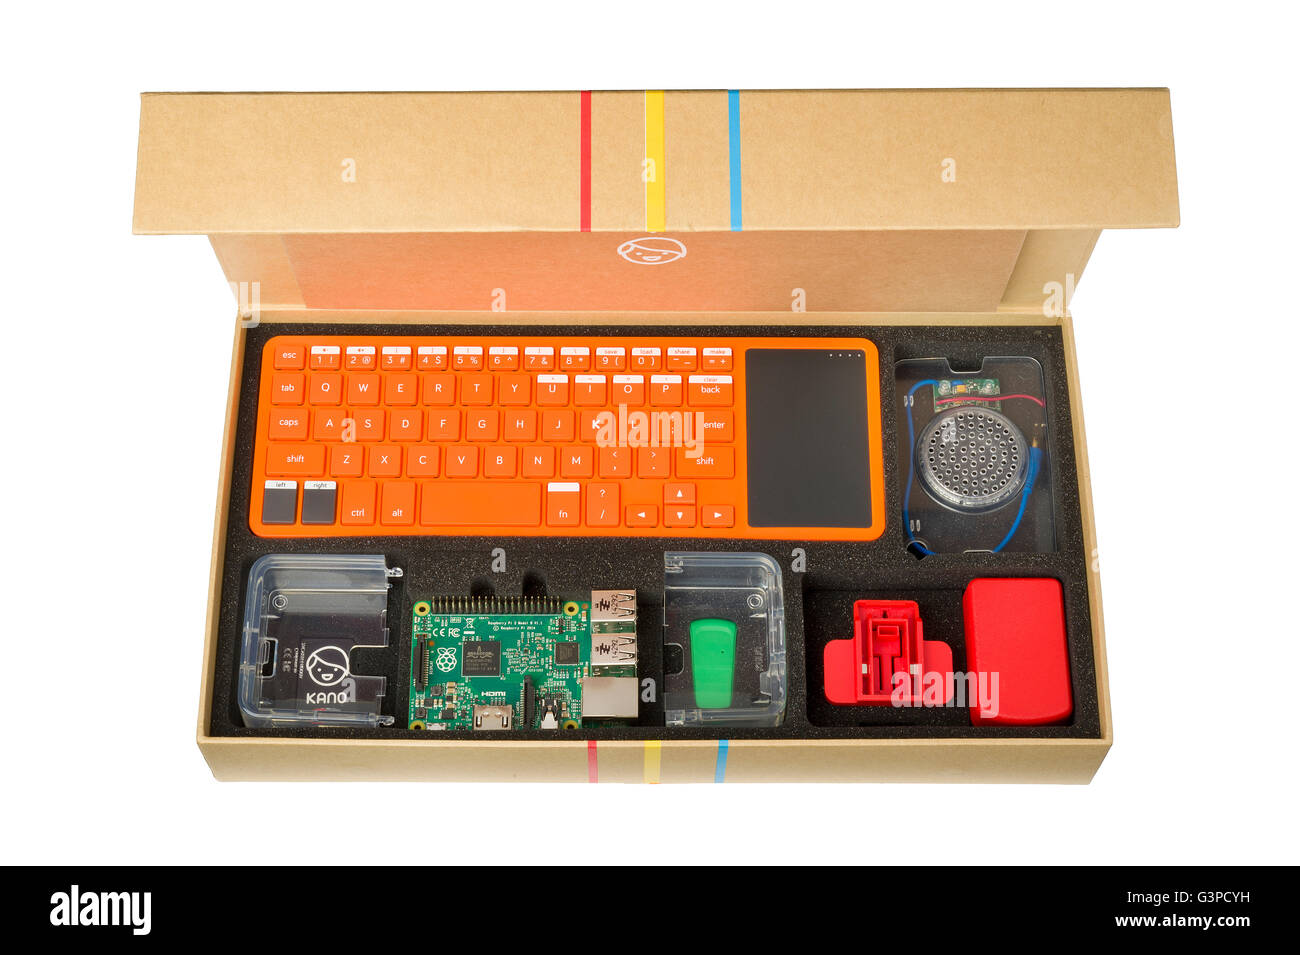 Kano computer kit in a cardboard box. Build and code a computer to teach children skills. Simple learning tool for all ages. Stock Photo